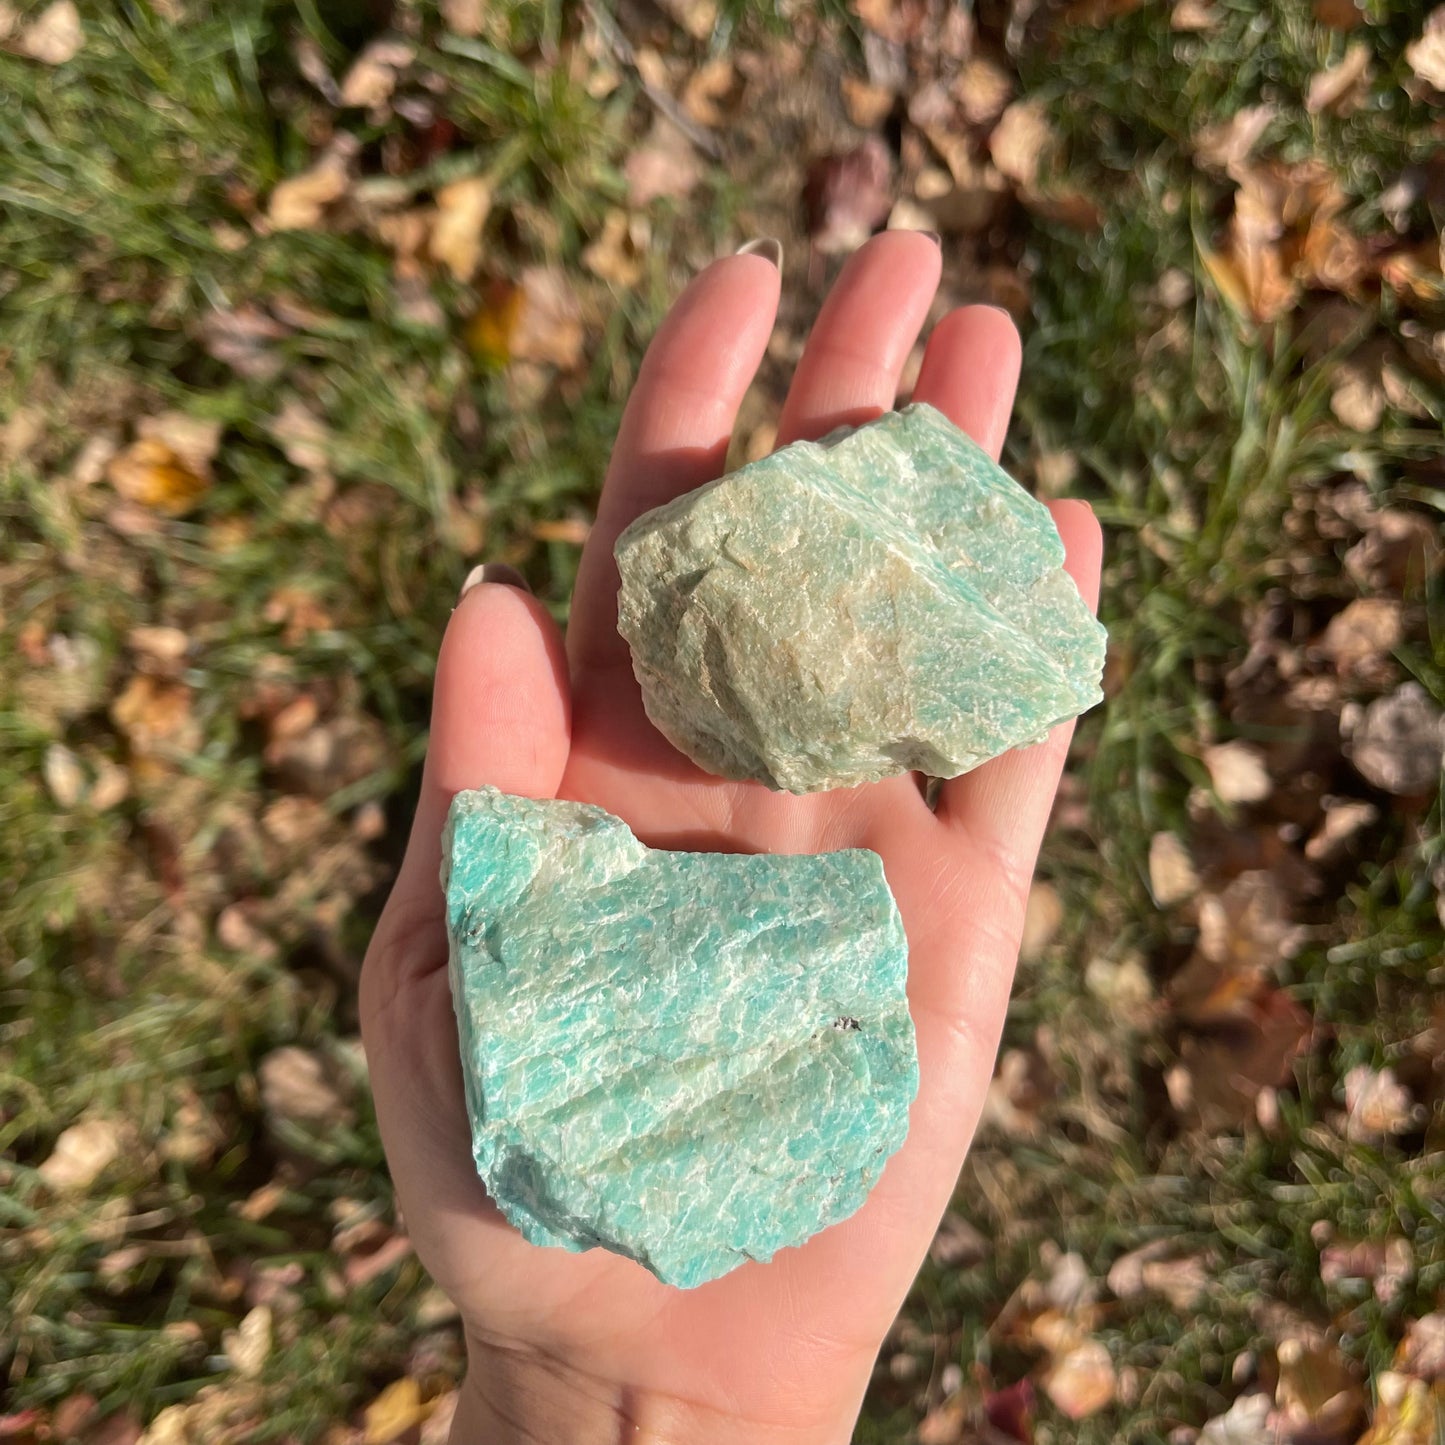 Raw Natural Amazonite Crystal [locally sourced]